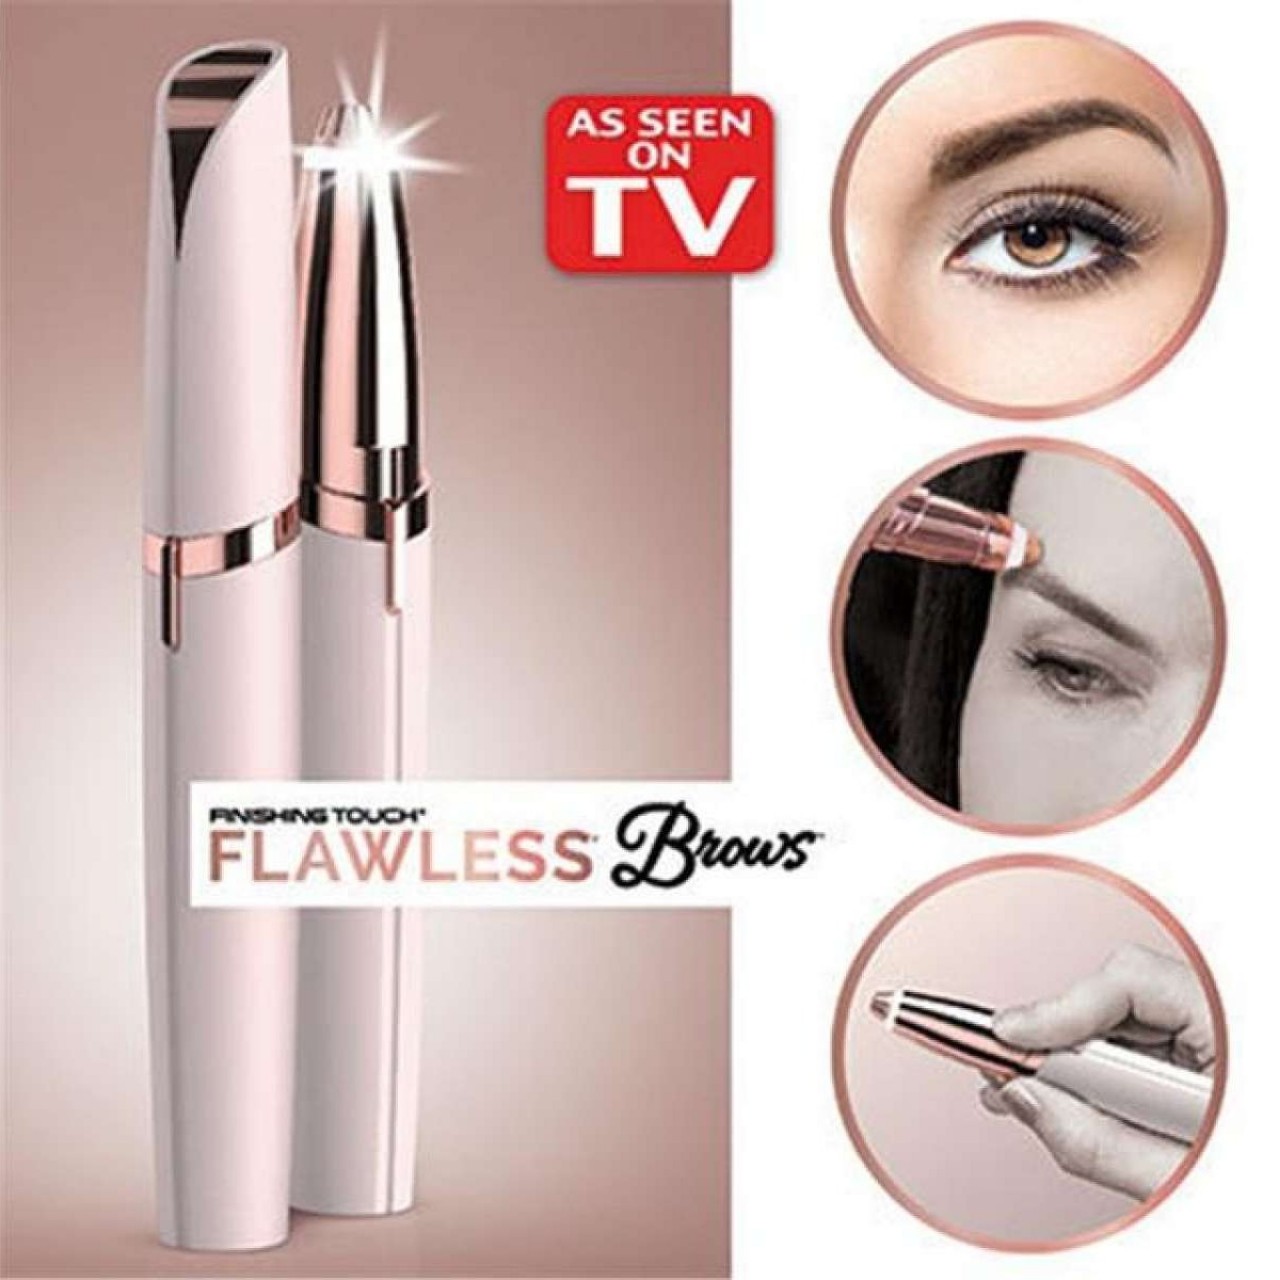 the brow trimmer